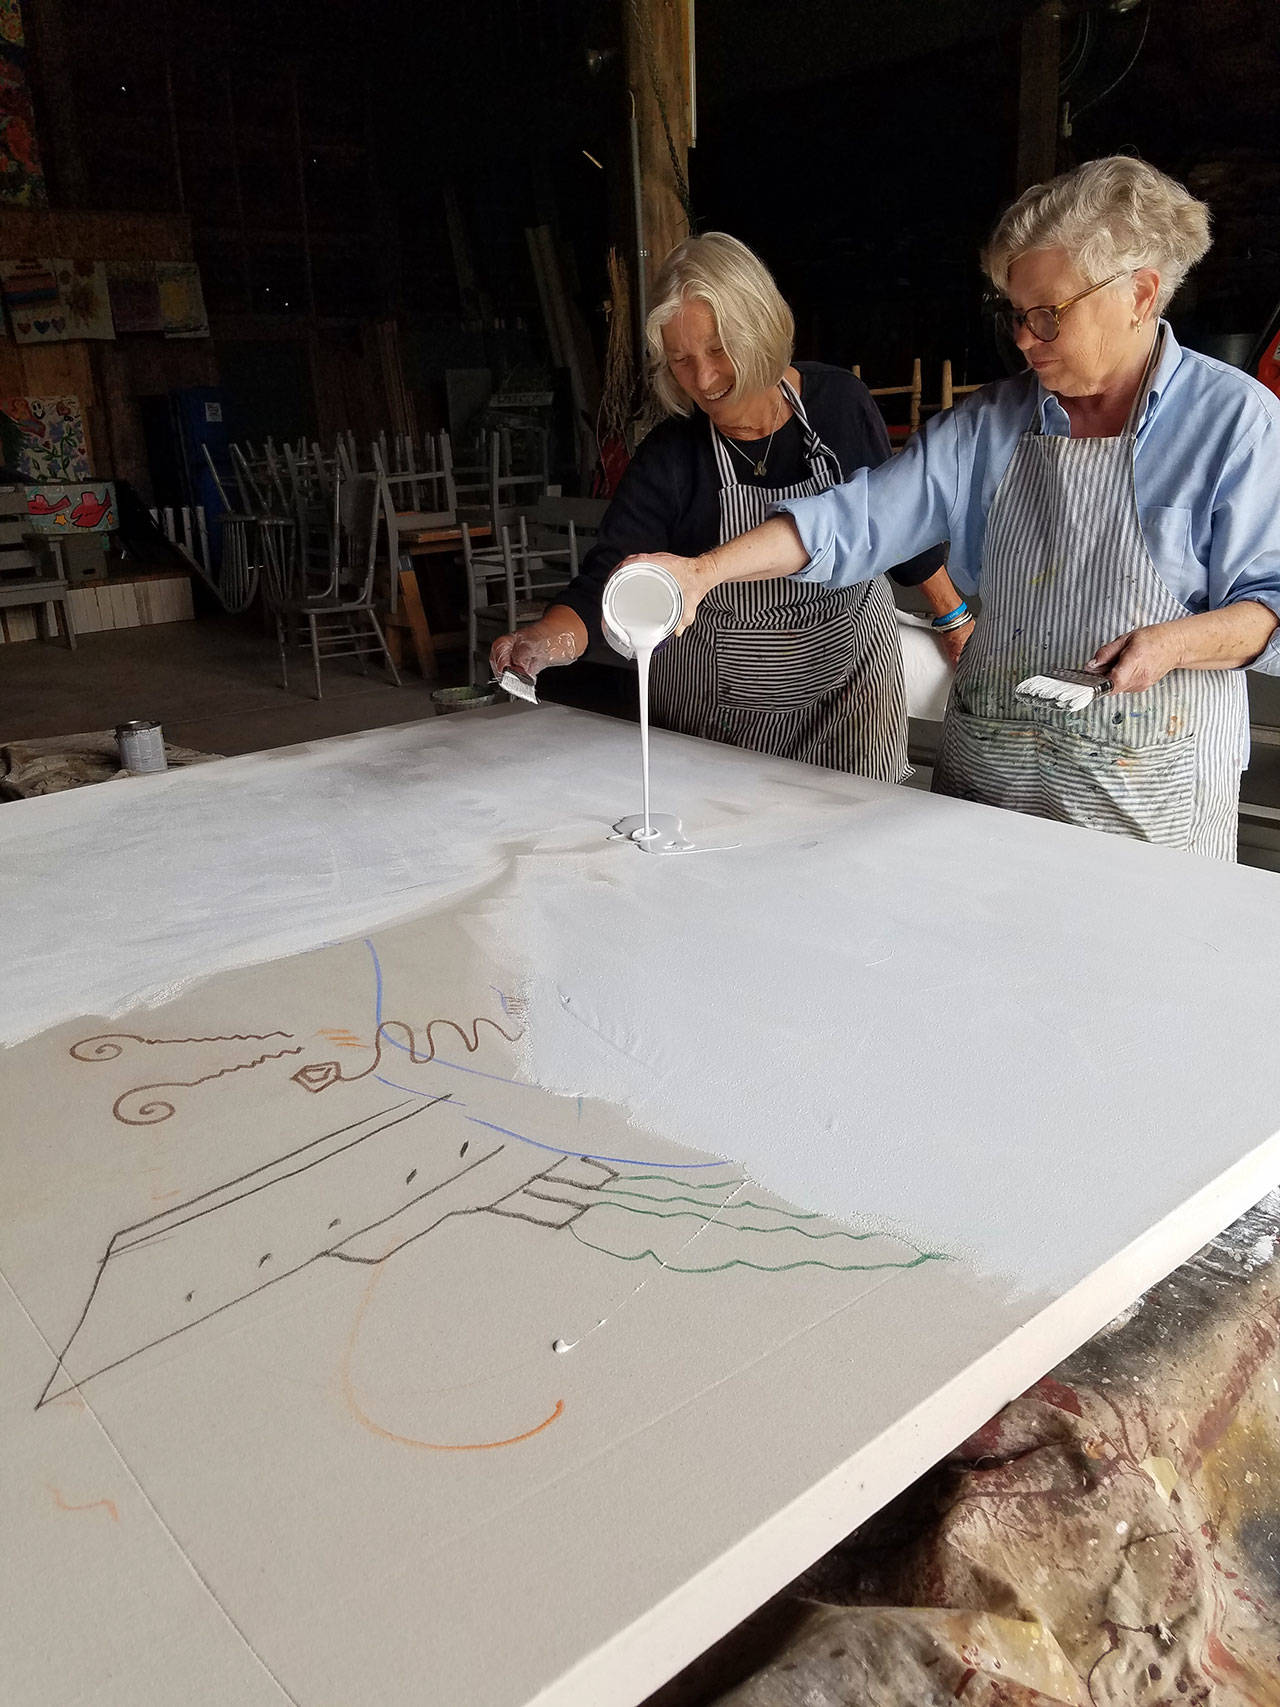 Sequim artists Lynne Armstrong, left, and Mary Franchini will collaborate on a piece of art during the 2021 ARTjam event, held in parallel with Sequim’s ARTfusion event on Labor Day weekend, Sept. 4-5. Submitted photo